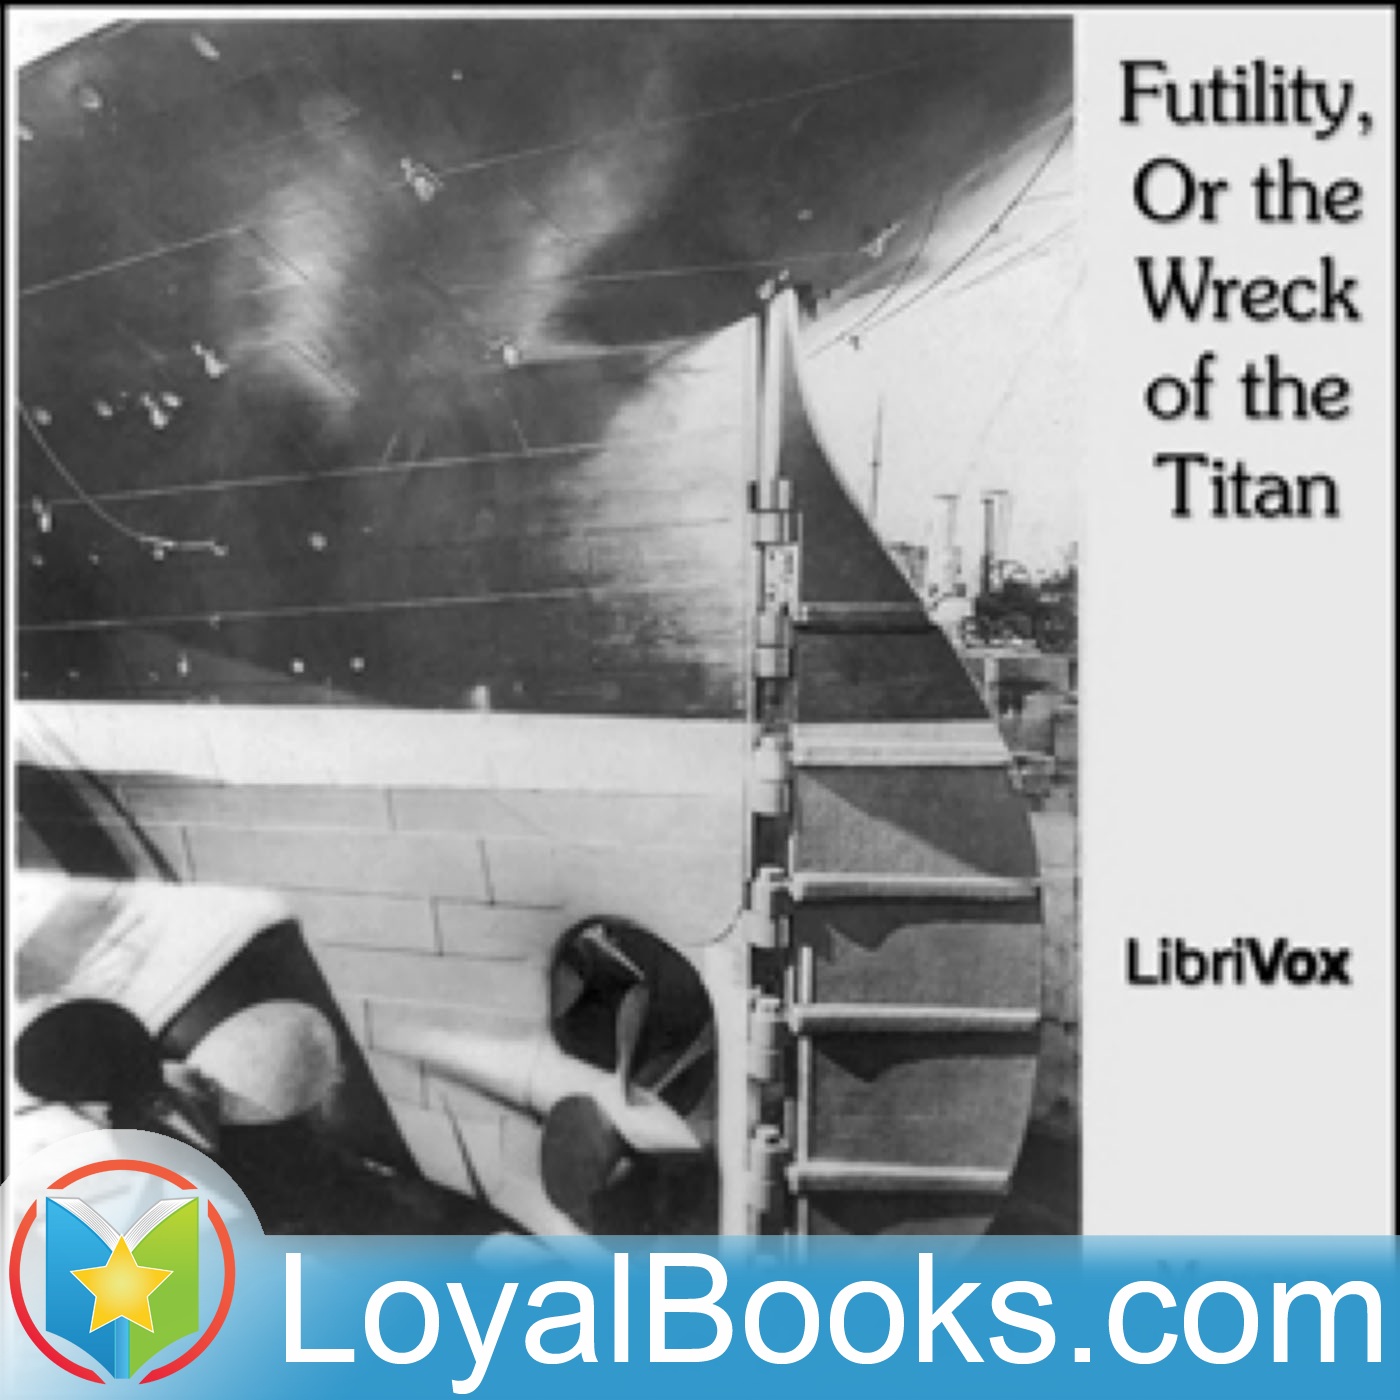 Futility, Or the Wreck of the Titan by Morgan Robertson